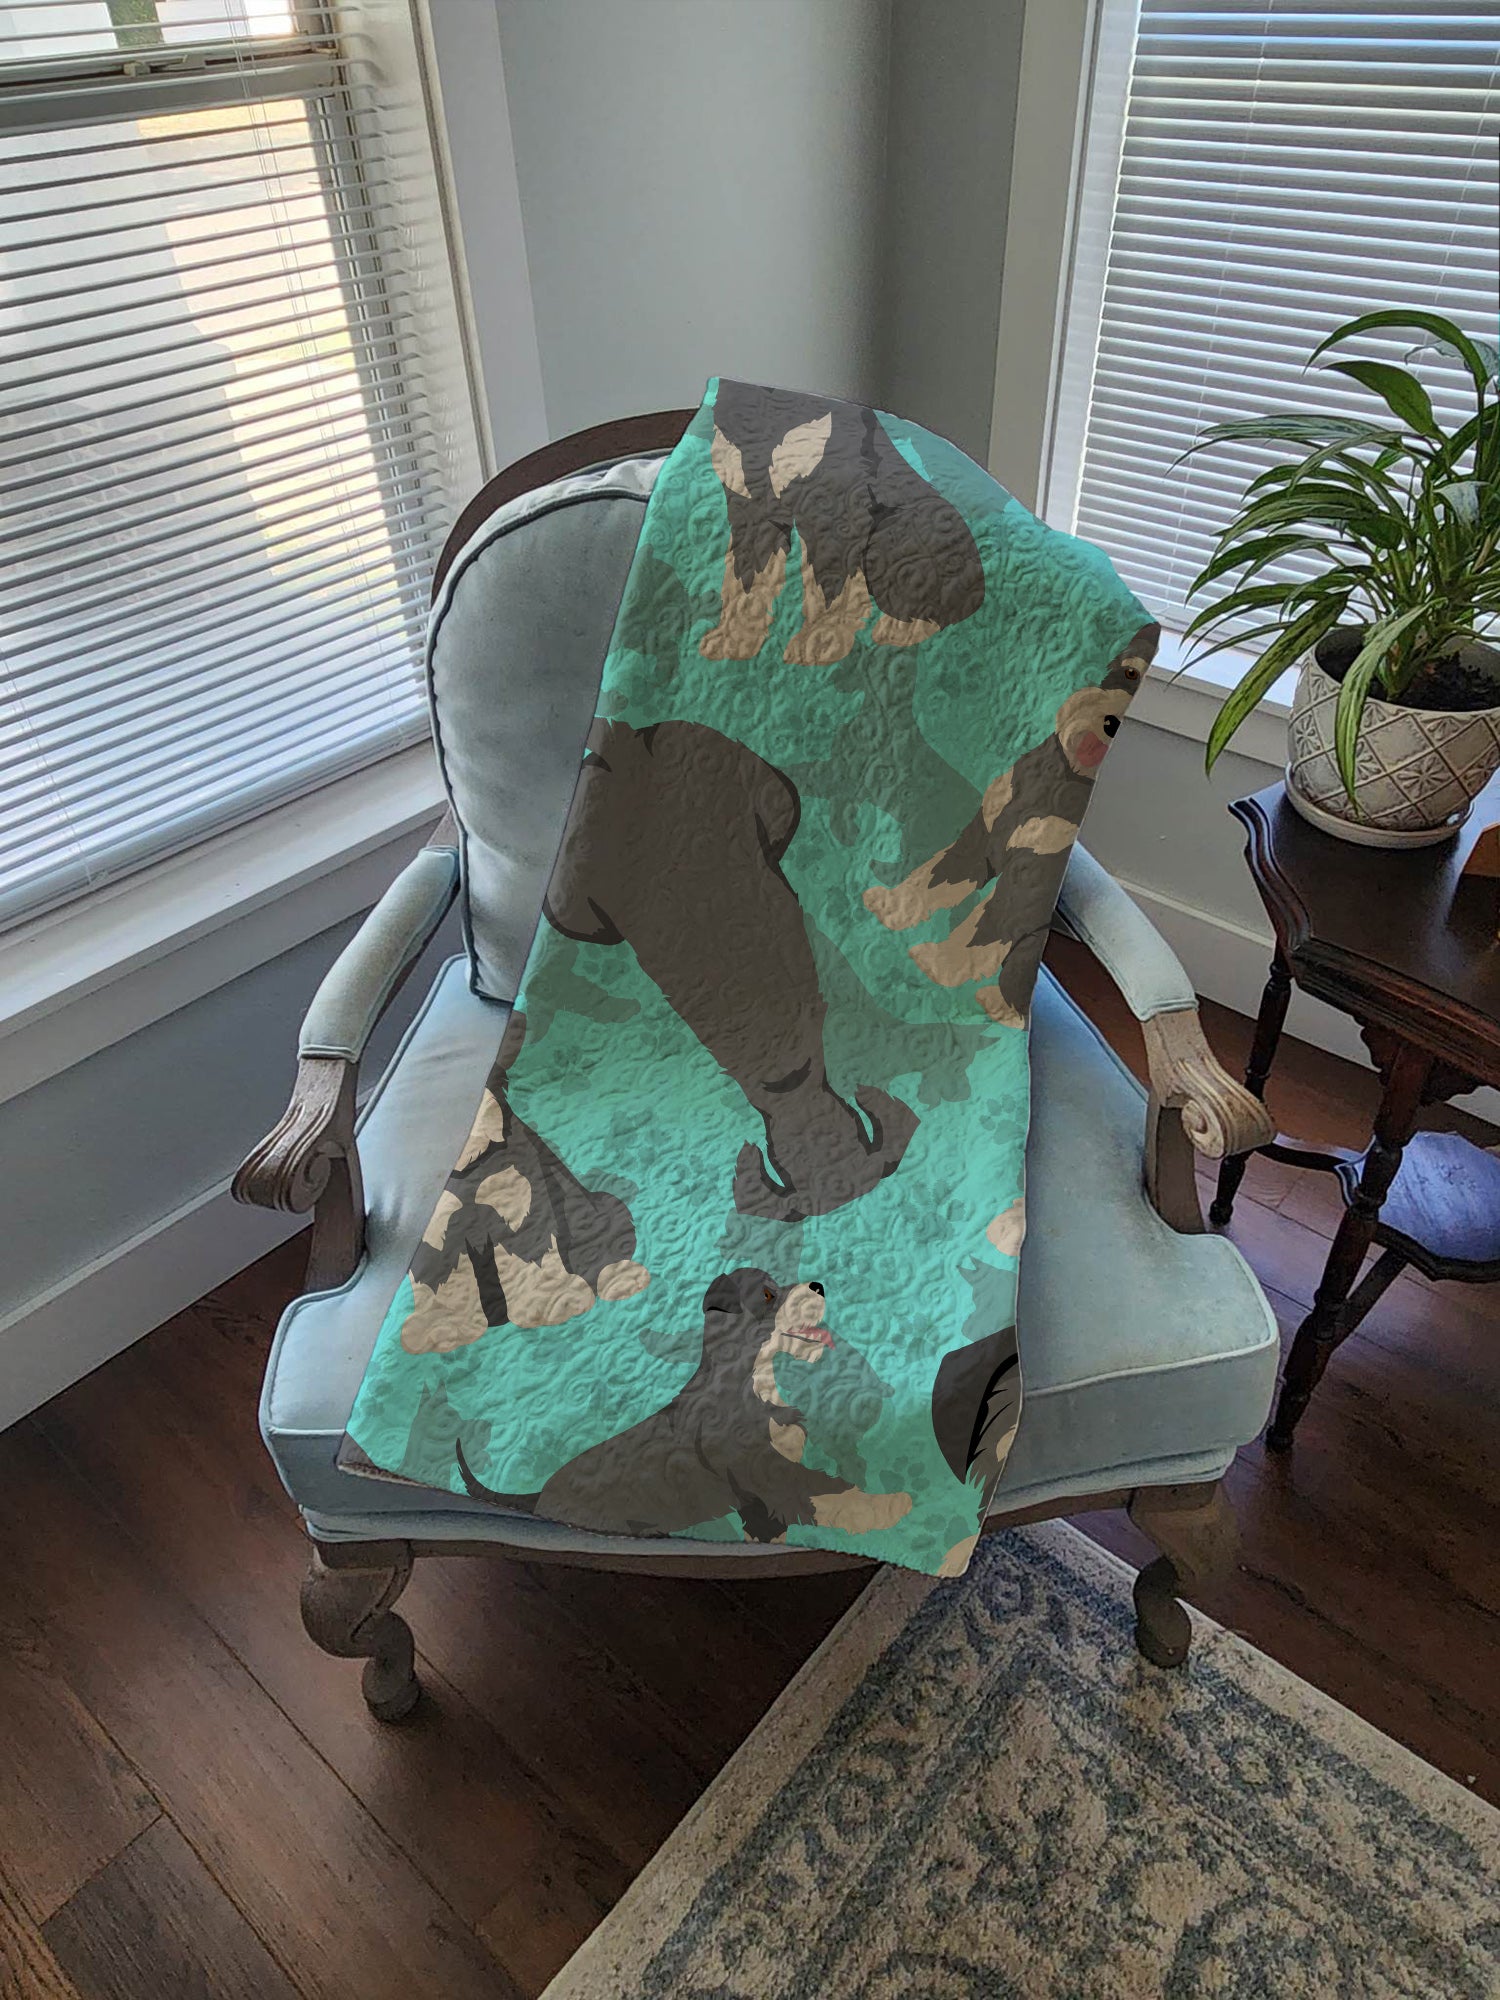 Schnauzer Quilted Blanket 50x60 - the-store.com